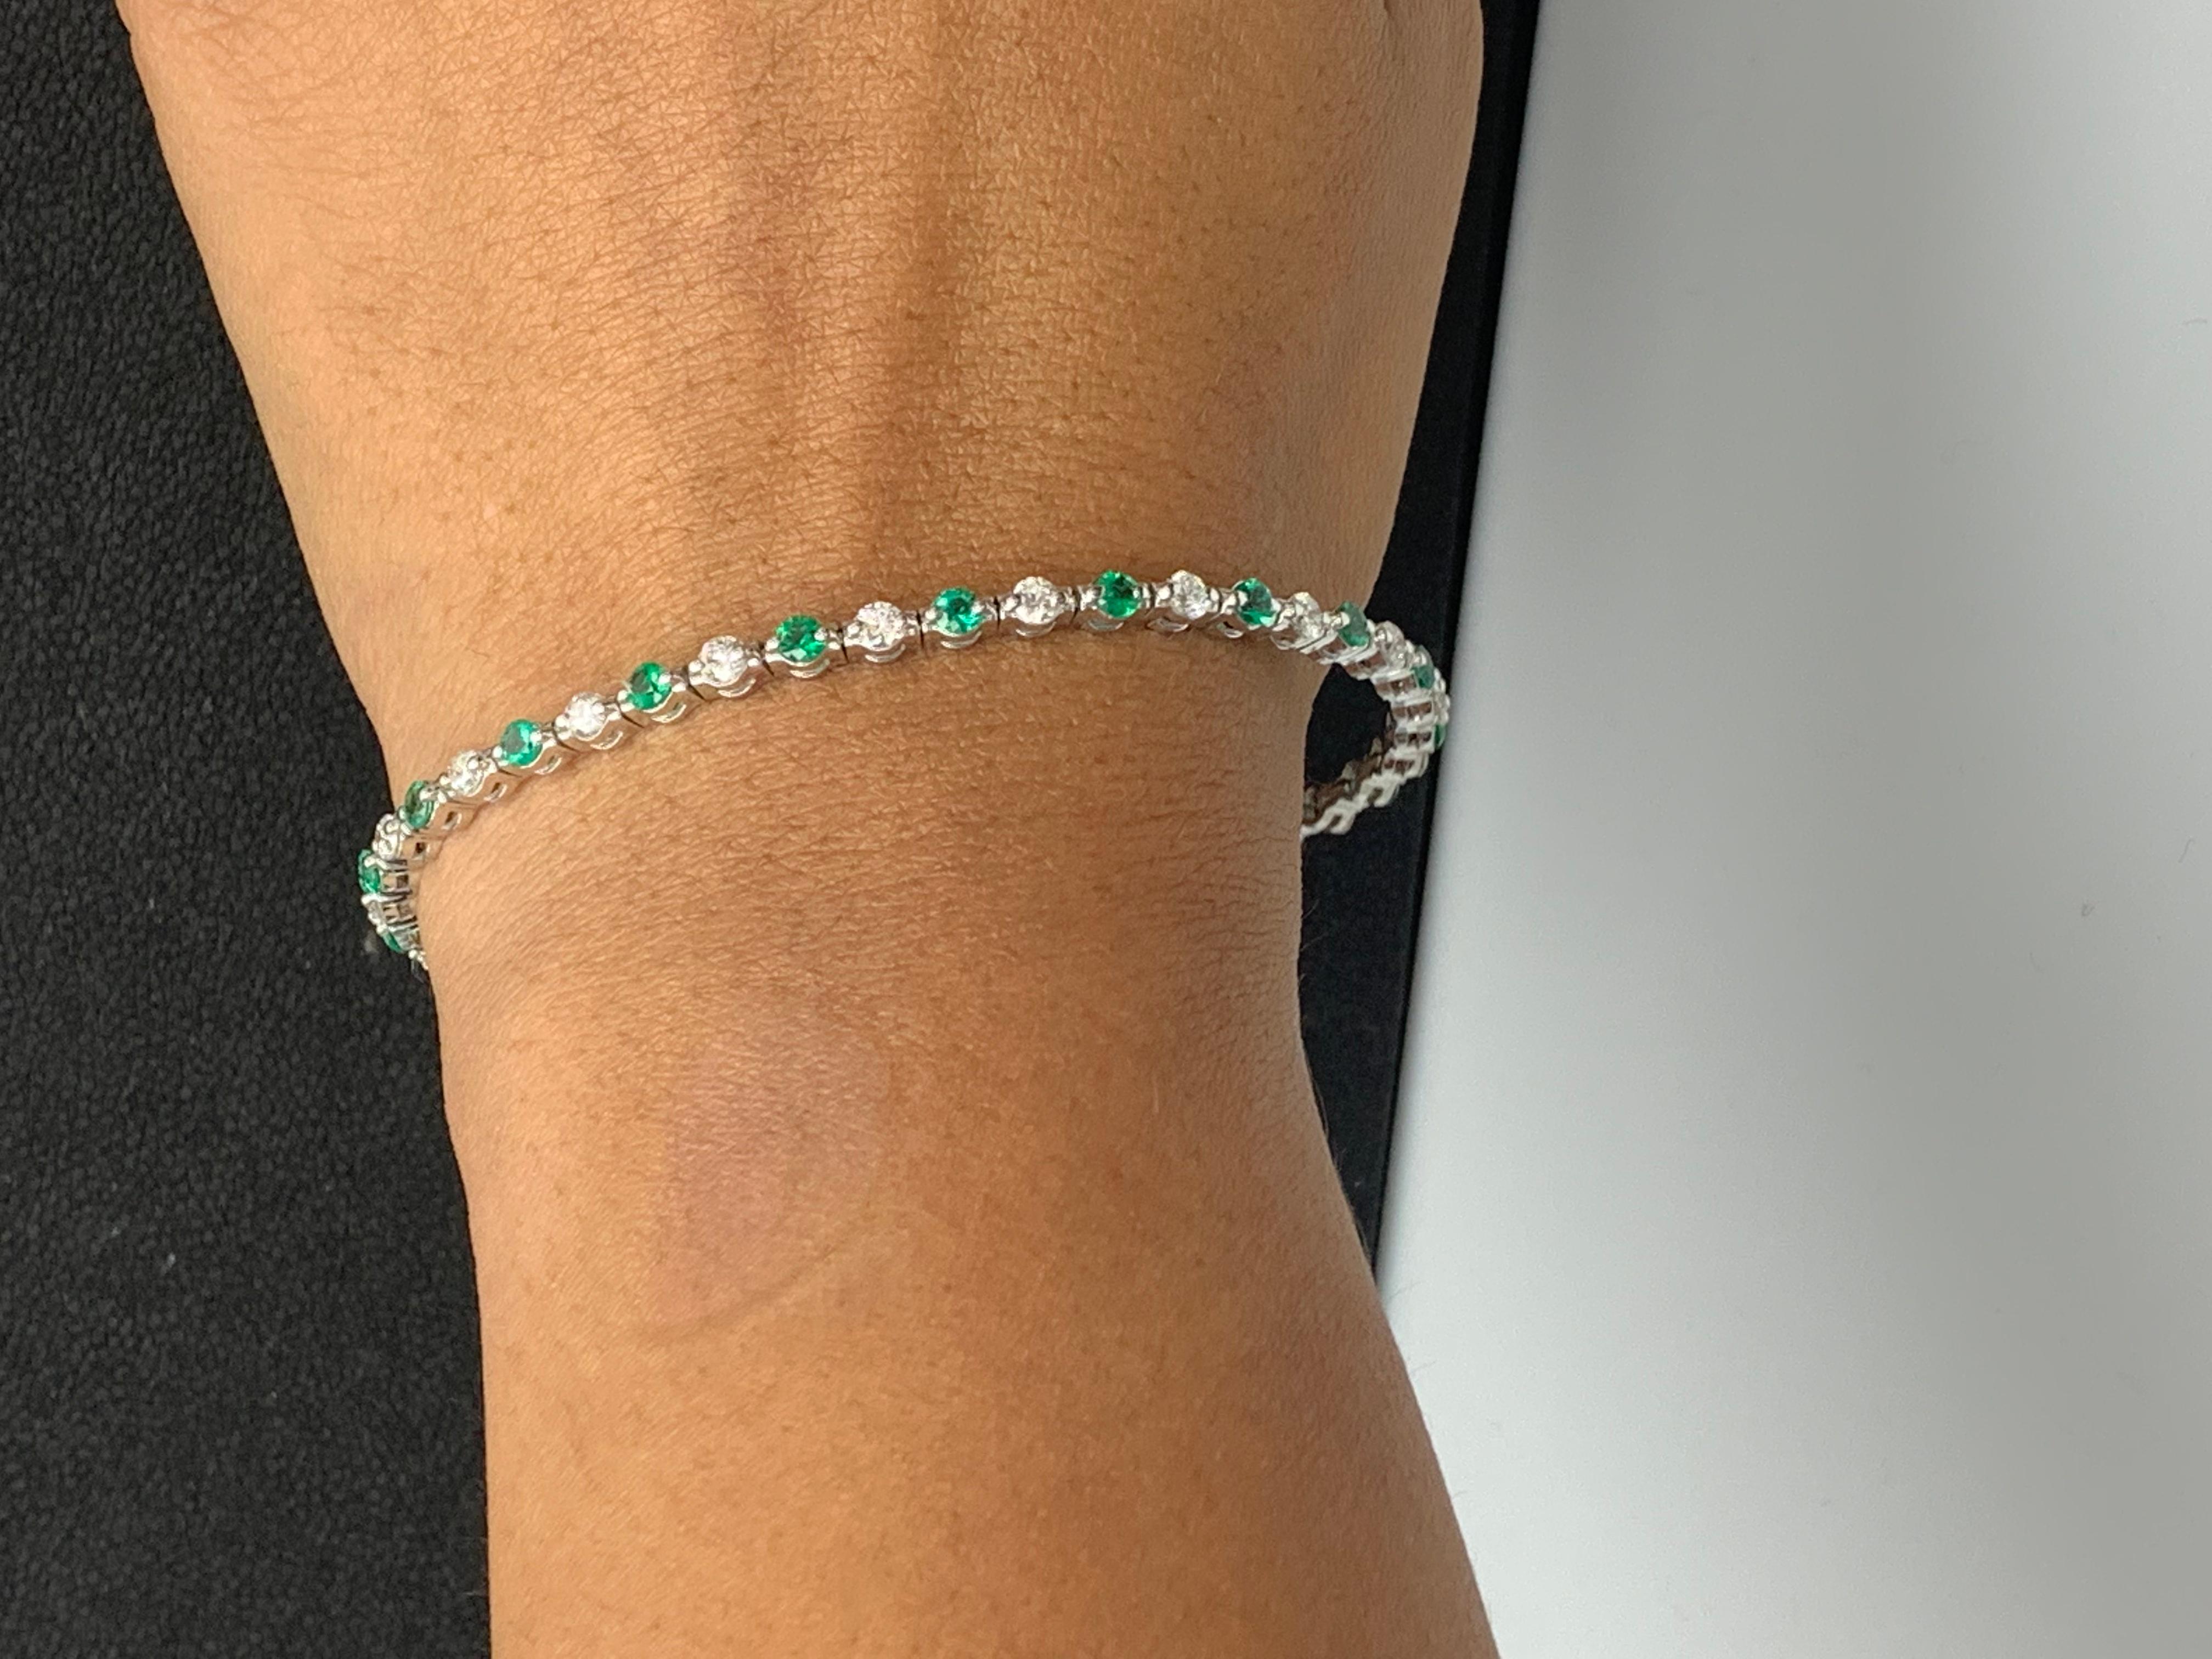 Round Cut Grandeur 2.24 Carat Round Emerald and Diamond Bracelet in 14K White Gold For Sale